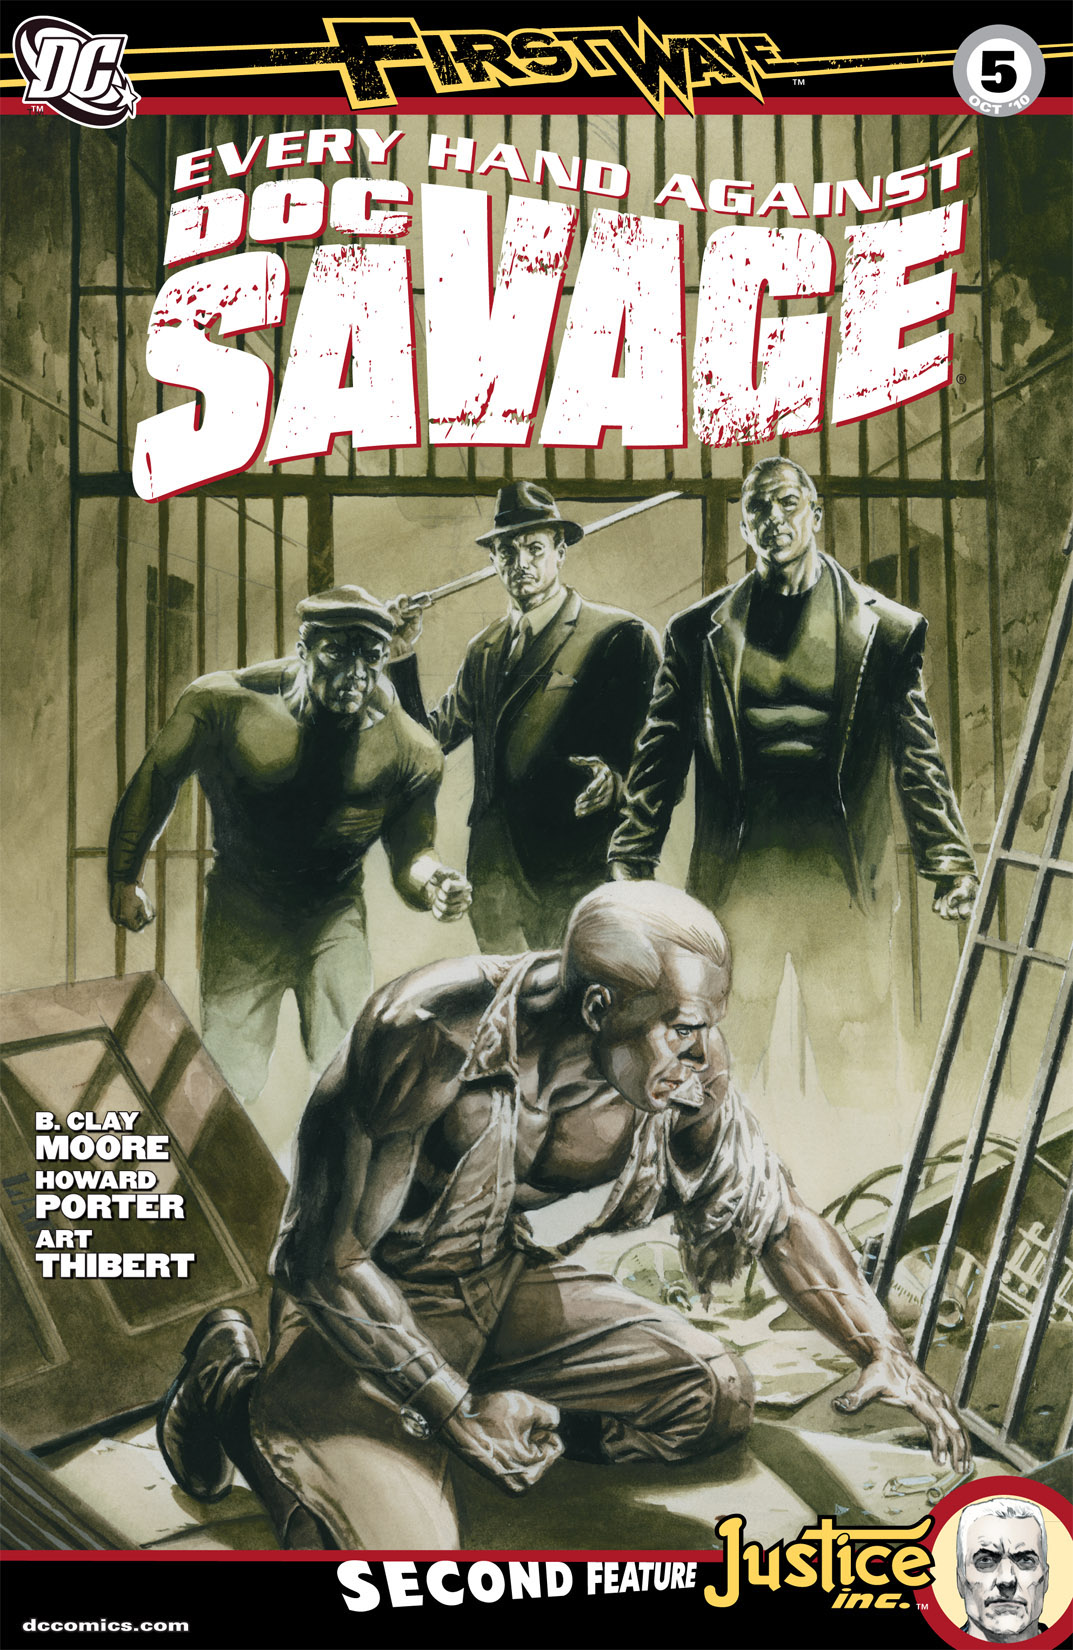 Doc Savage #5 preview images